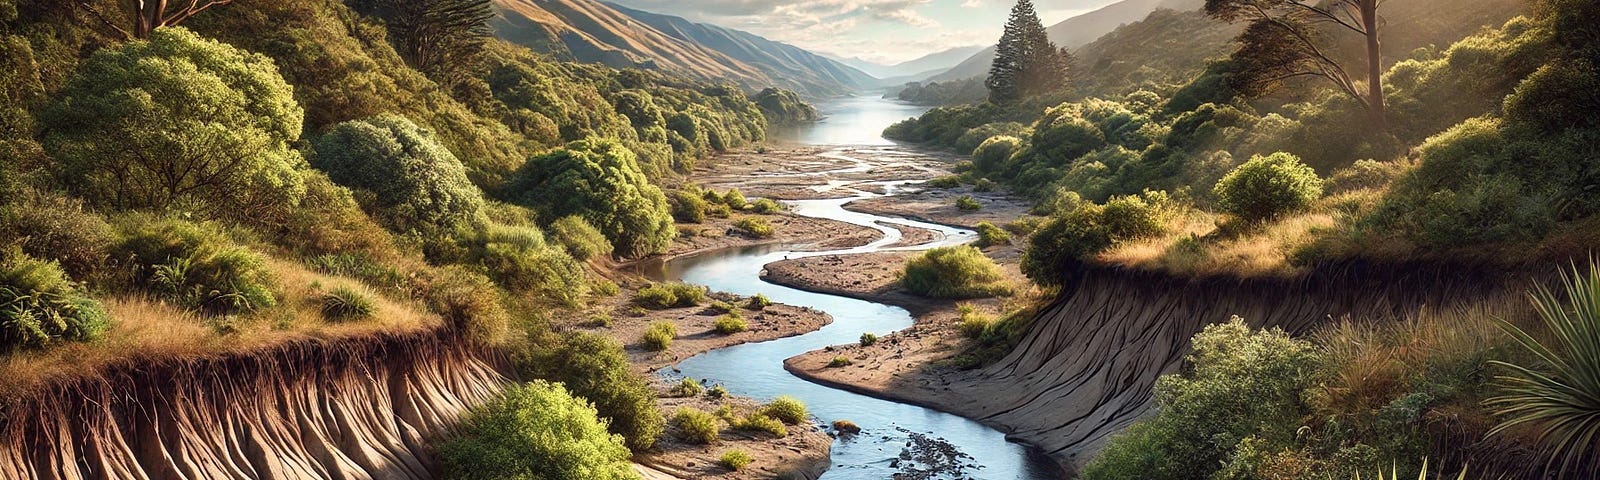 A picturesque river landscape with a mix of flowing and dry stream beds. The foreground features a dry gully surrounded by lush green vegetation, while the background shows a larger river flowing steadily. The scene illustrates the contrast between ephemeral and perennial streams, with clear blue skies, a few clouds, and distant mountains in the background.